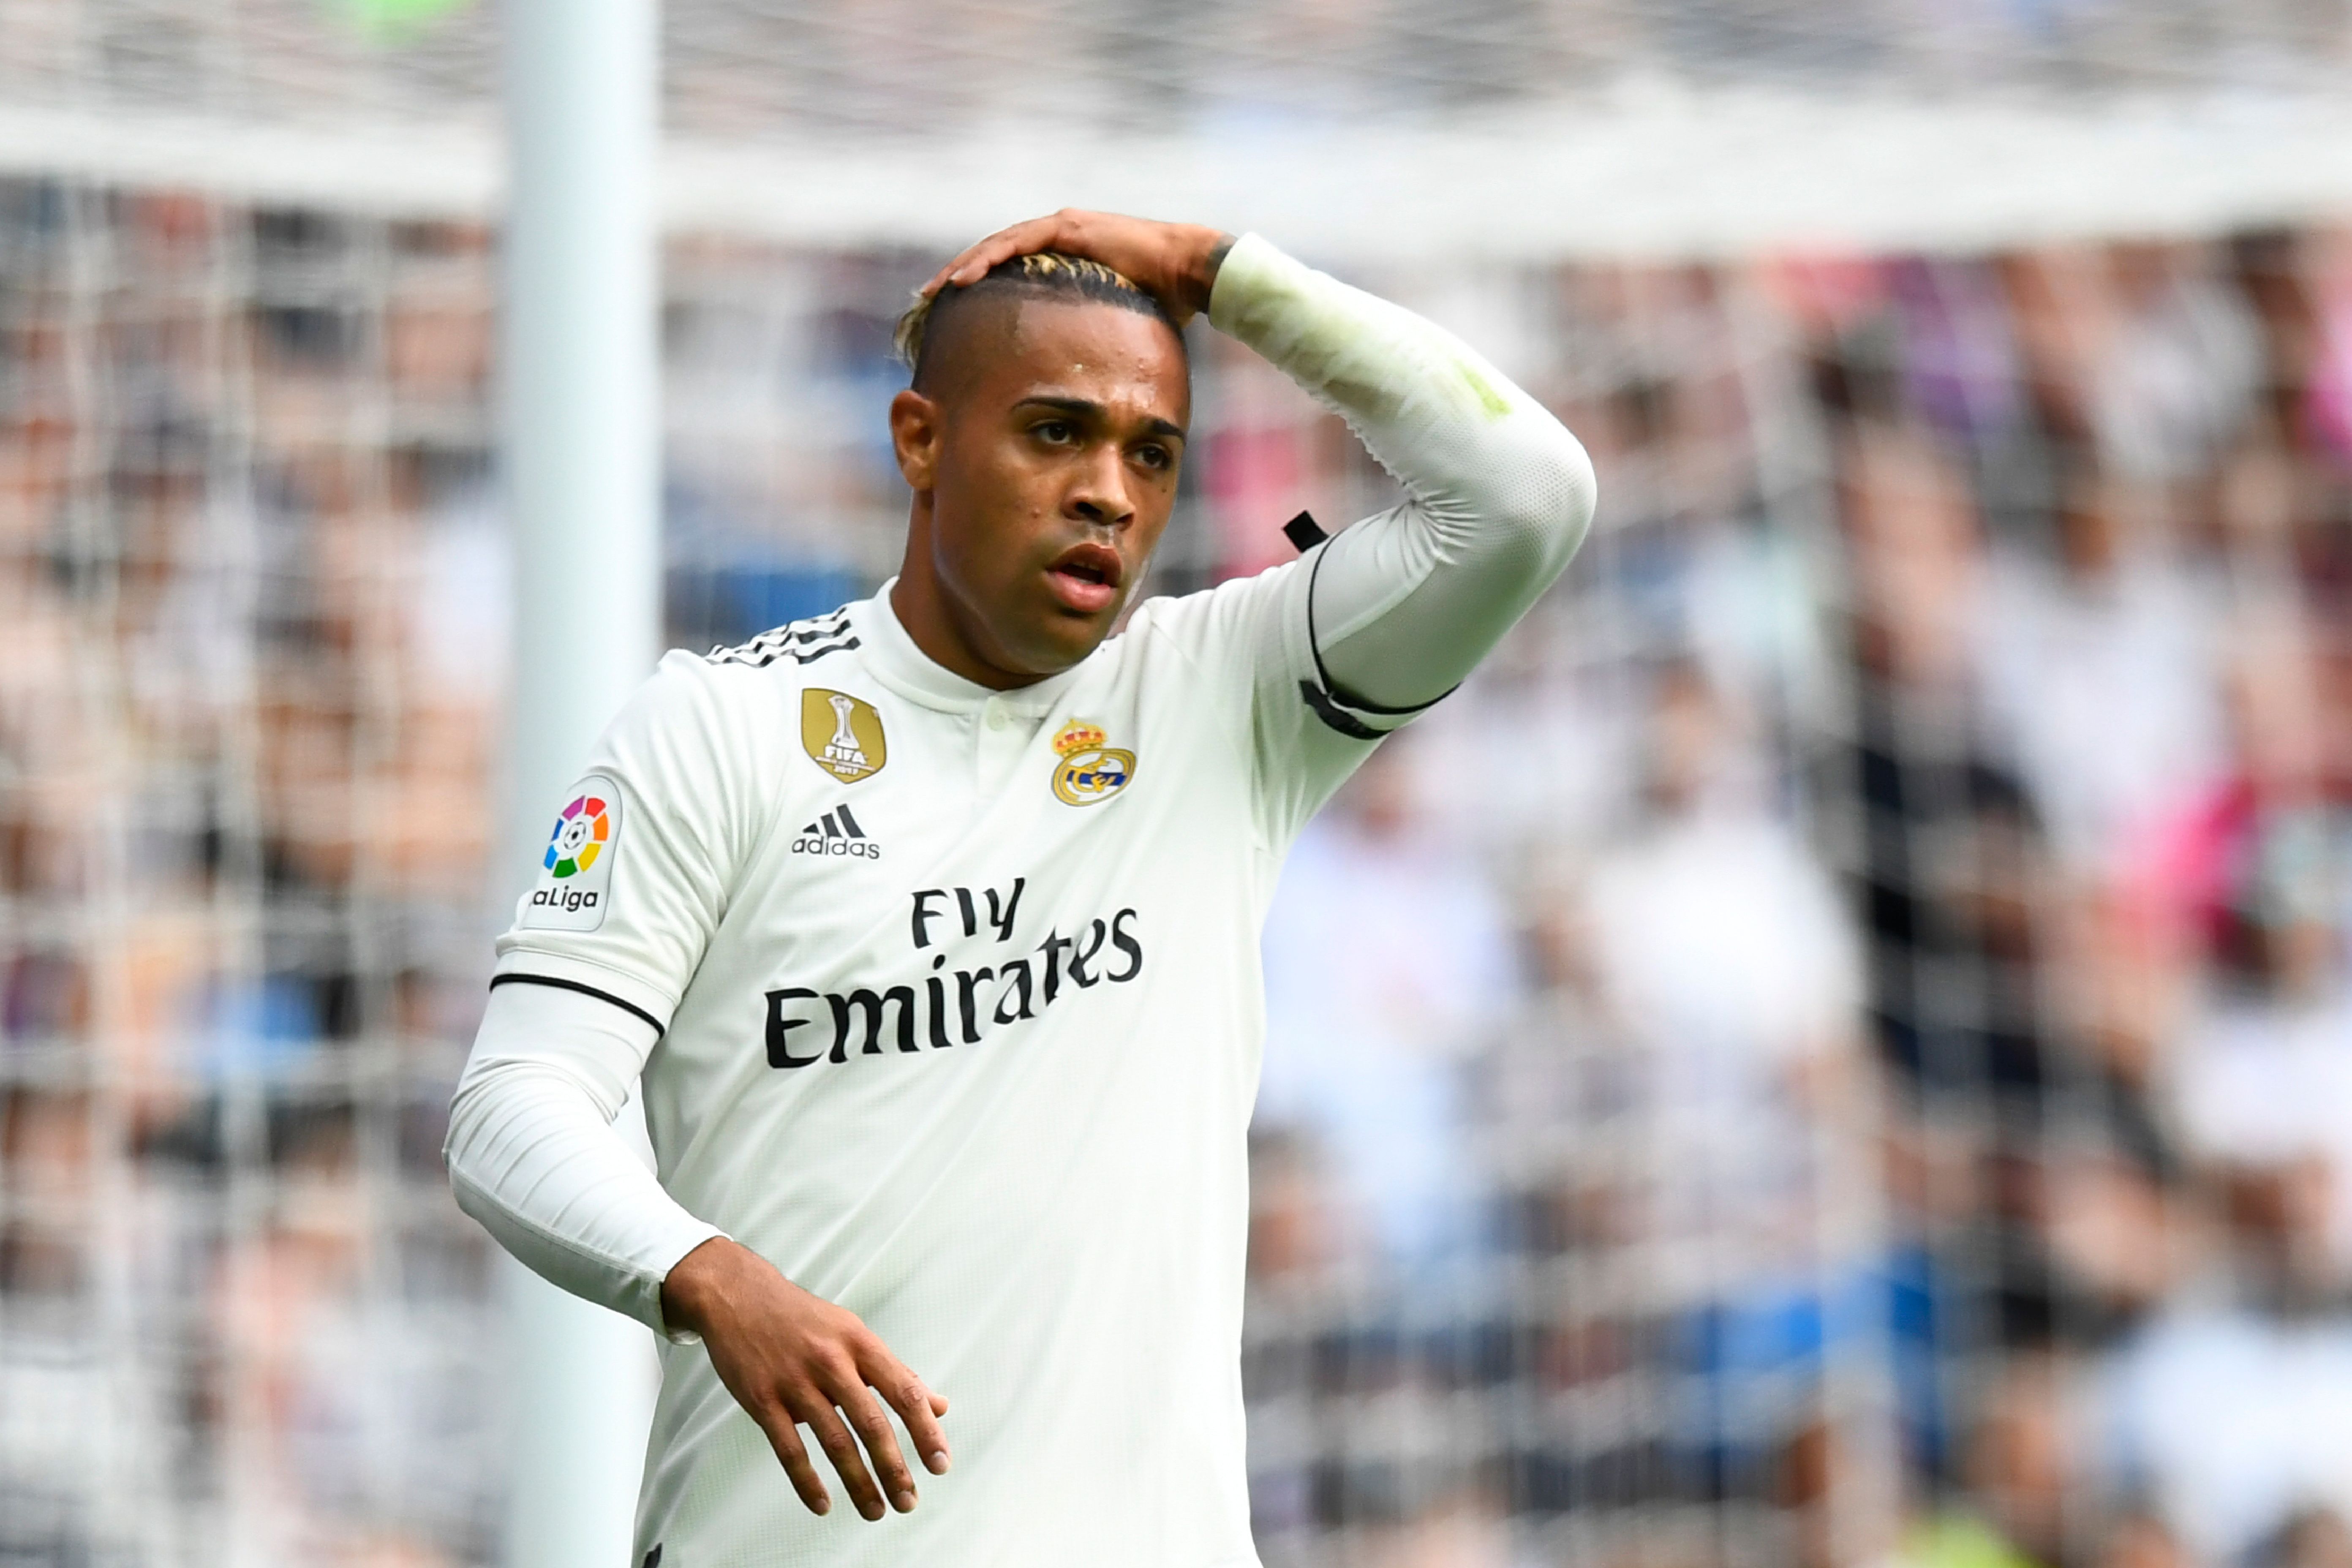 Mariano on his way to Valladolid? (Photo by Gabriel Bouys/AFP/Getty Images)